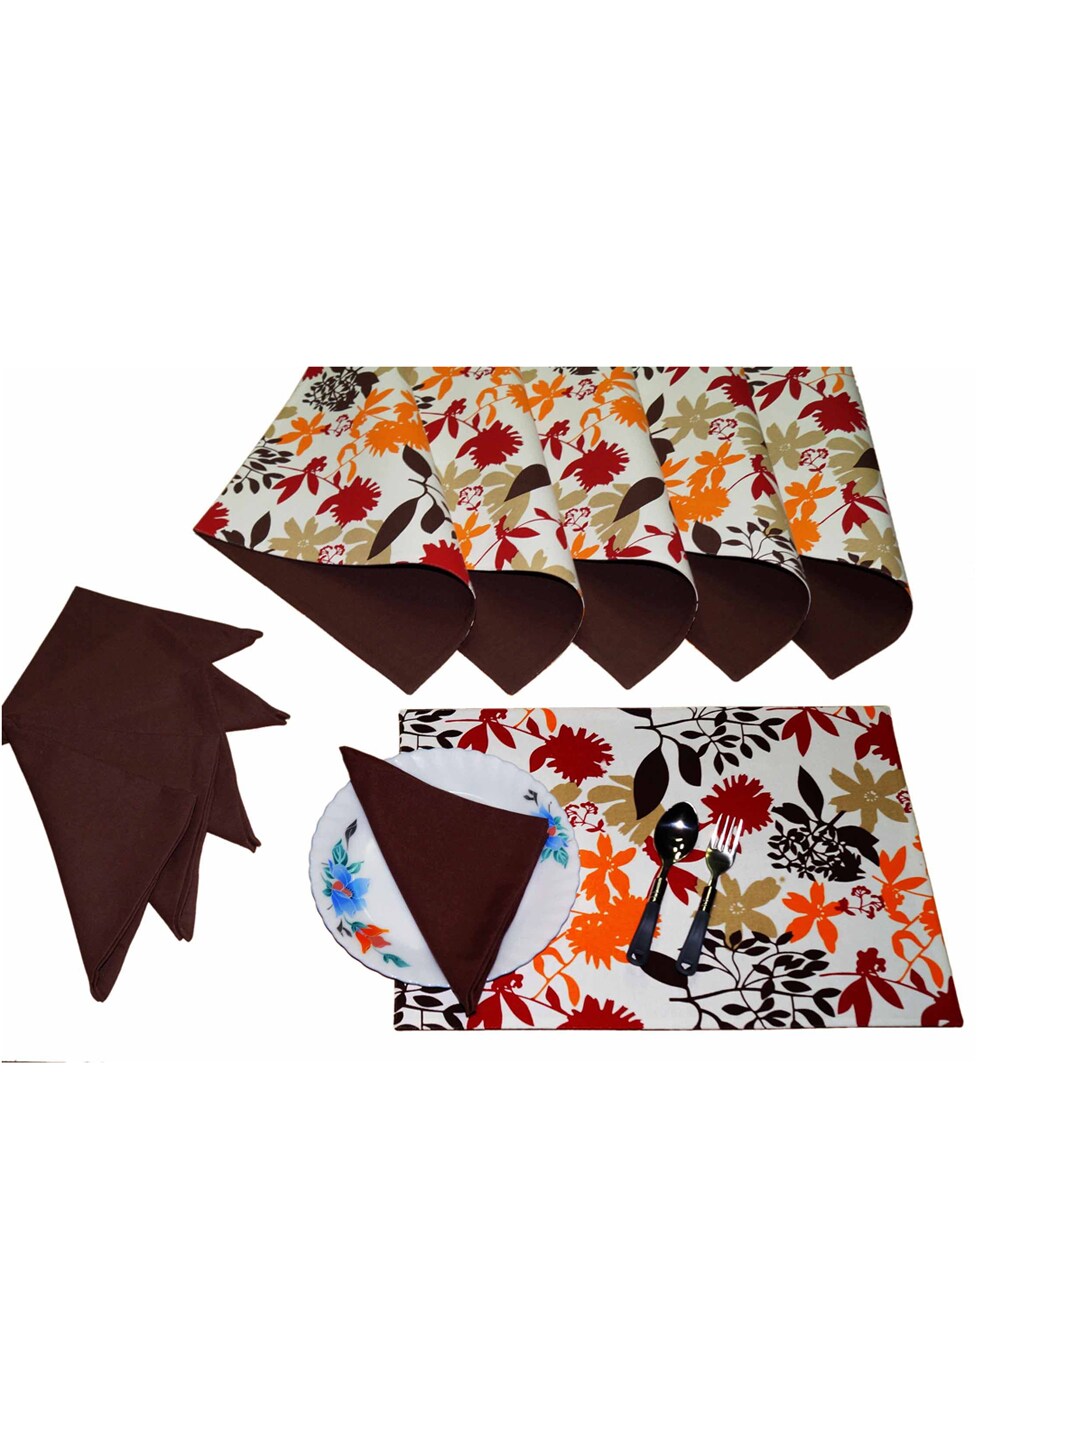 Lushomes Multi 6 Leaf Printed Cotton Reversible Mats Price in India